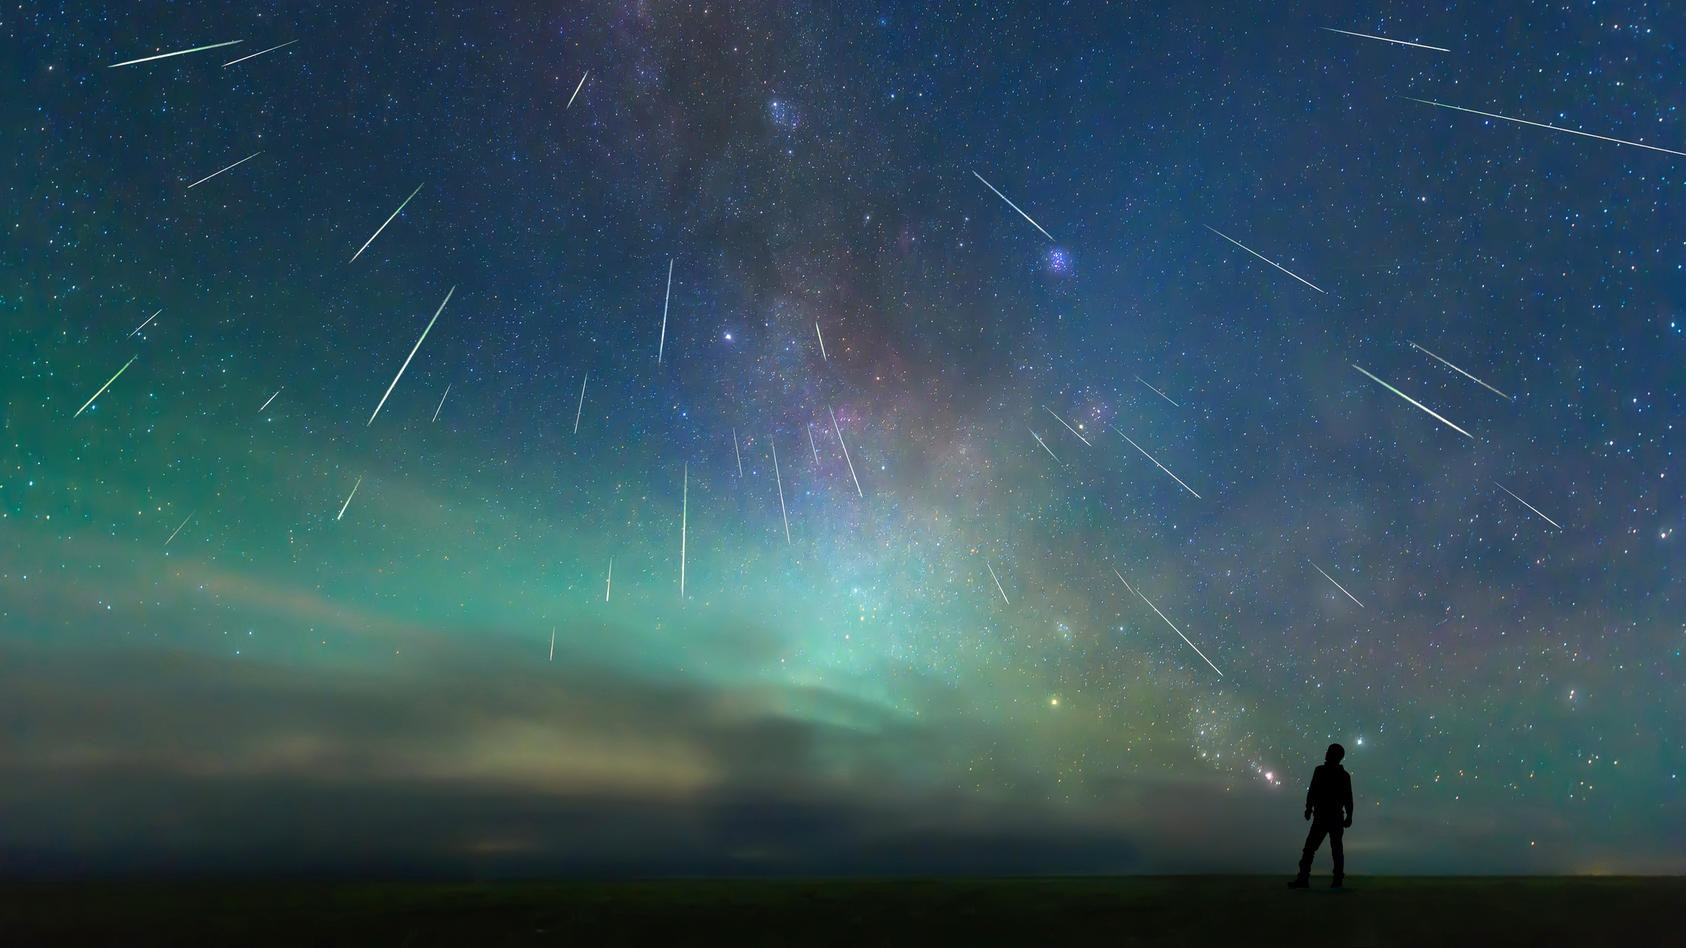 Shooting Stars in July: Up to 100 Fireballs Per Hour – When Are the Perseids Coming?